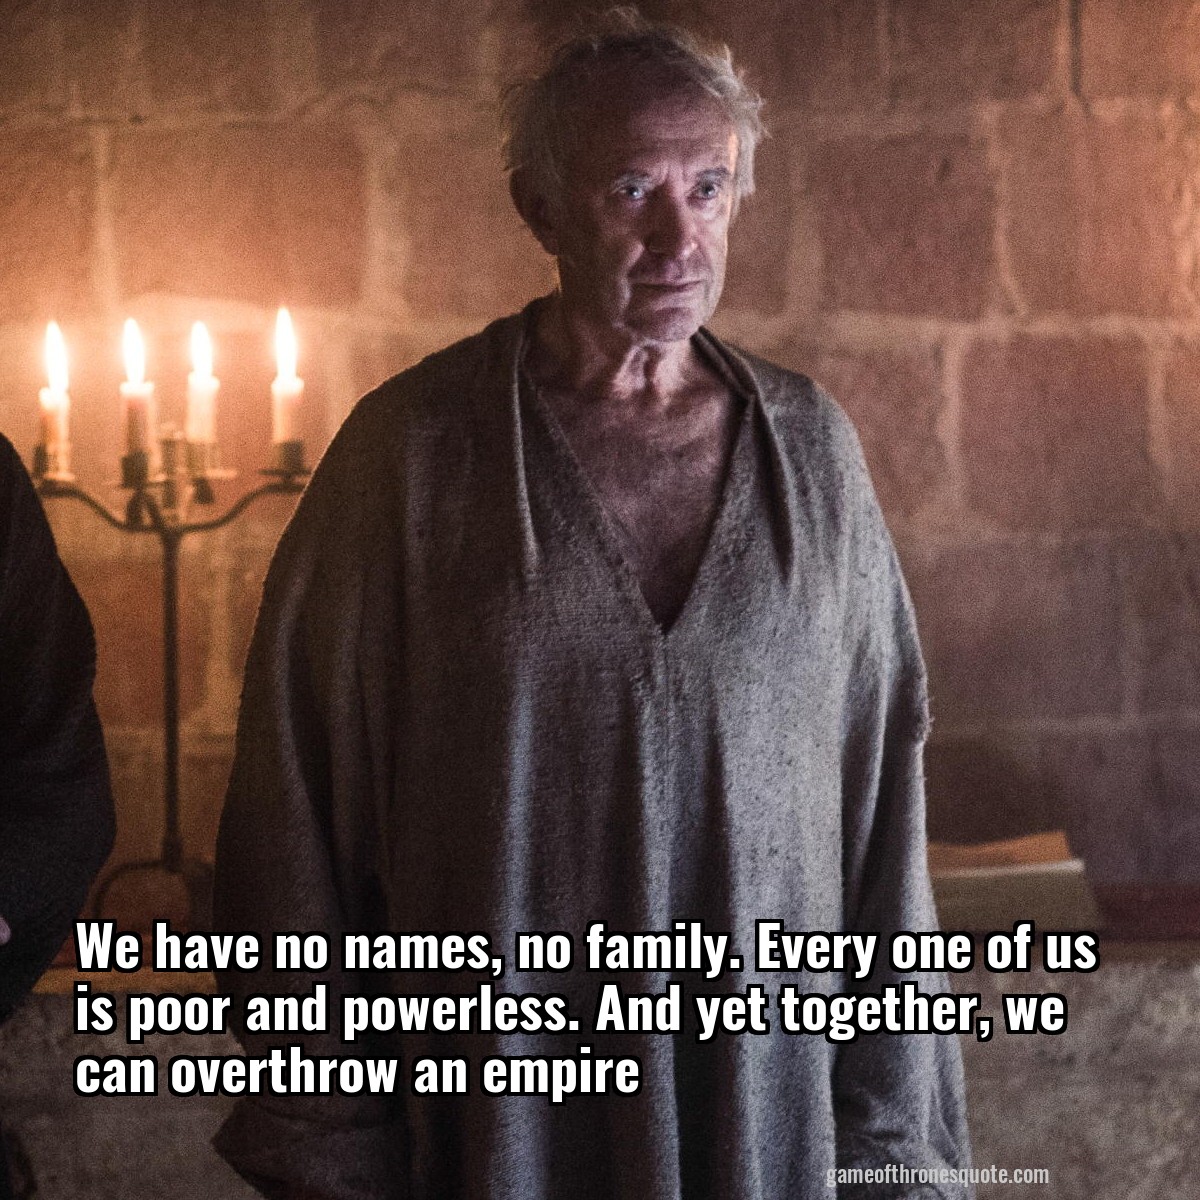 We have no names, no family. Every one of us is poor and powerless. And yet together, we can overthrow an empire